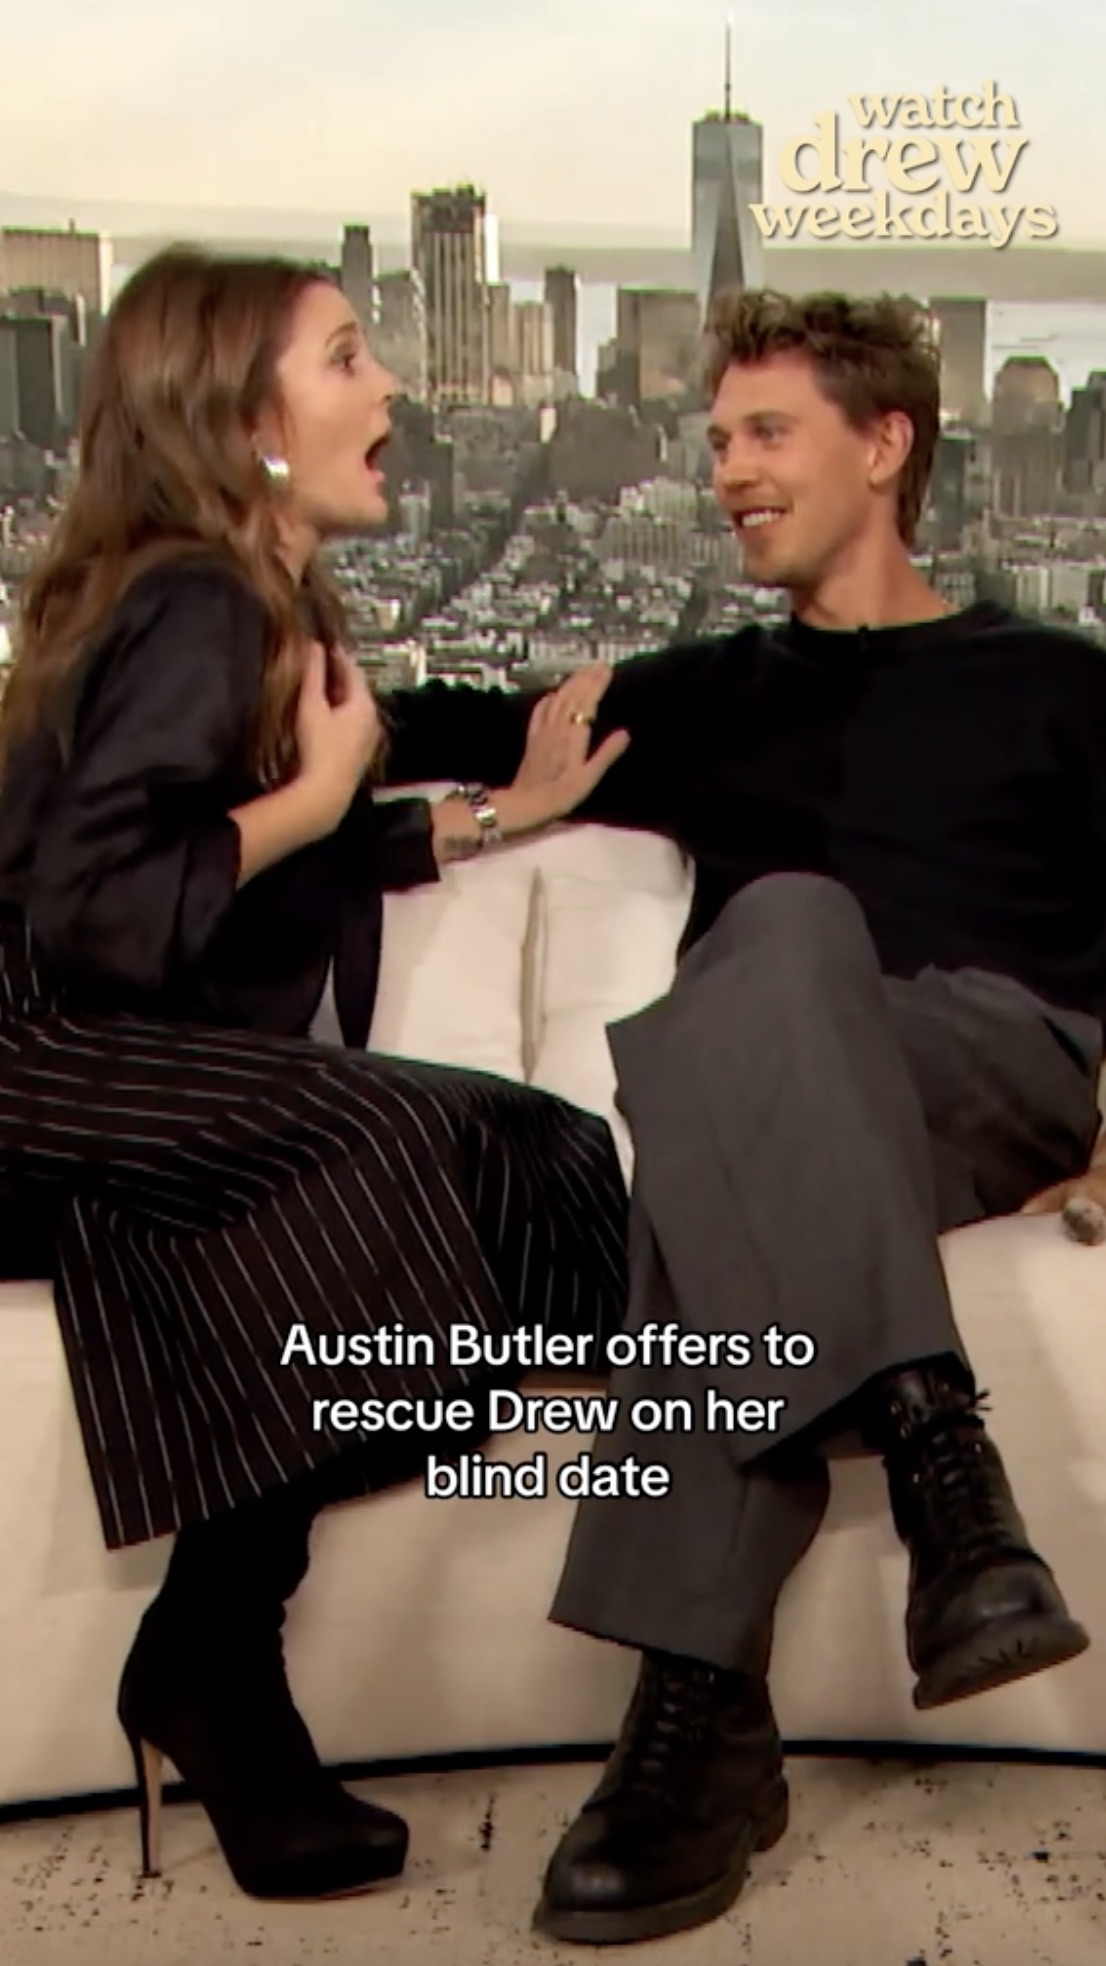 Austin offered to be Drew's 'friend' and would give her a surprise call to bail her out